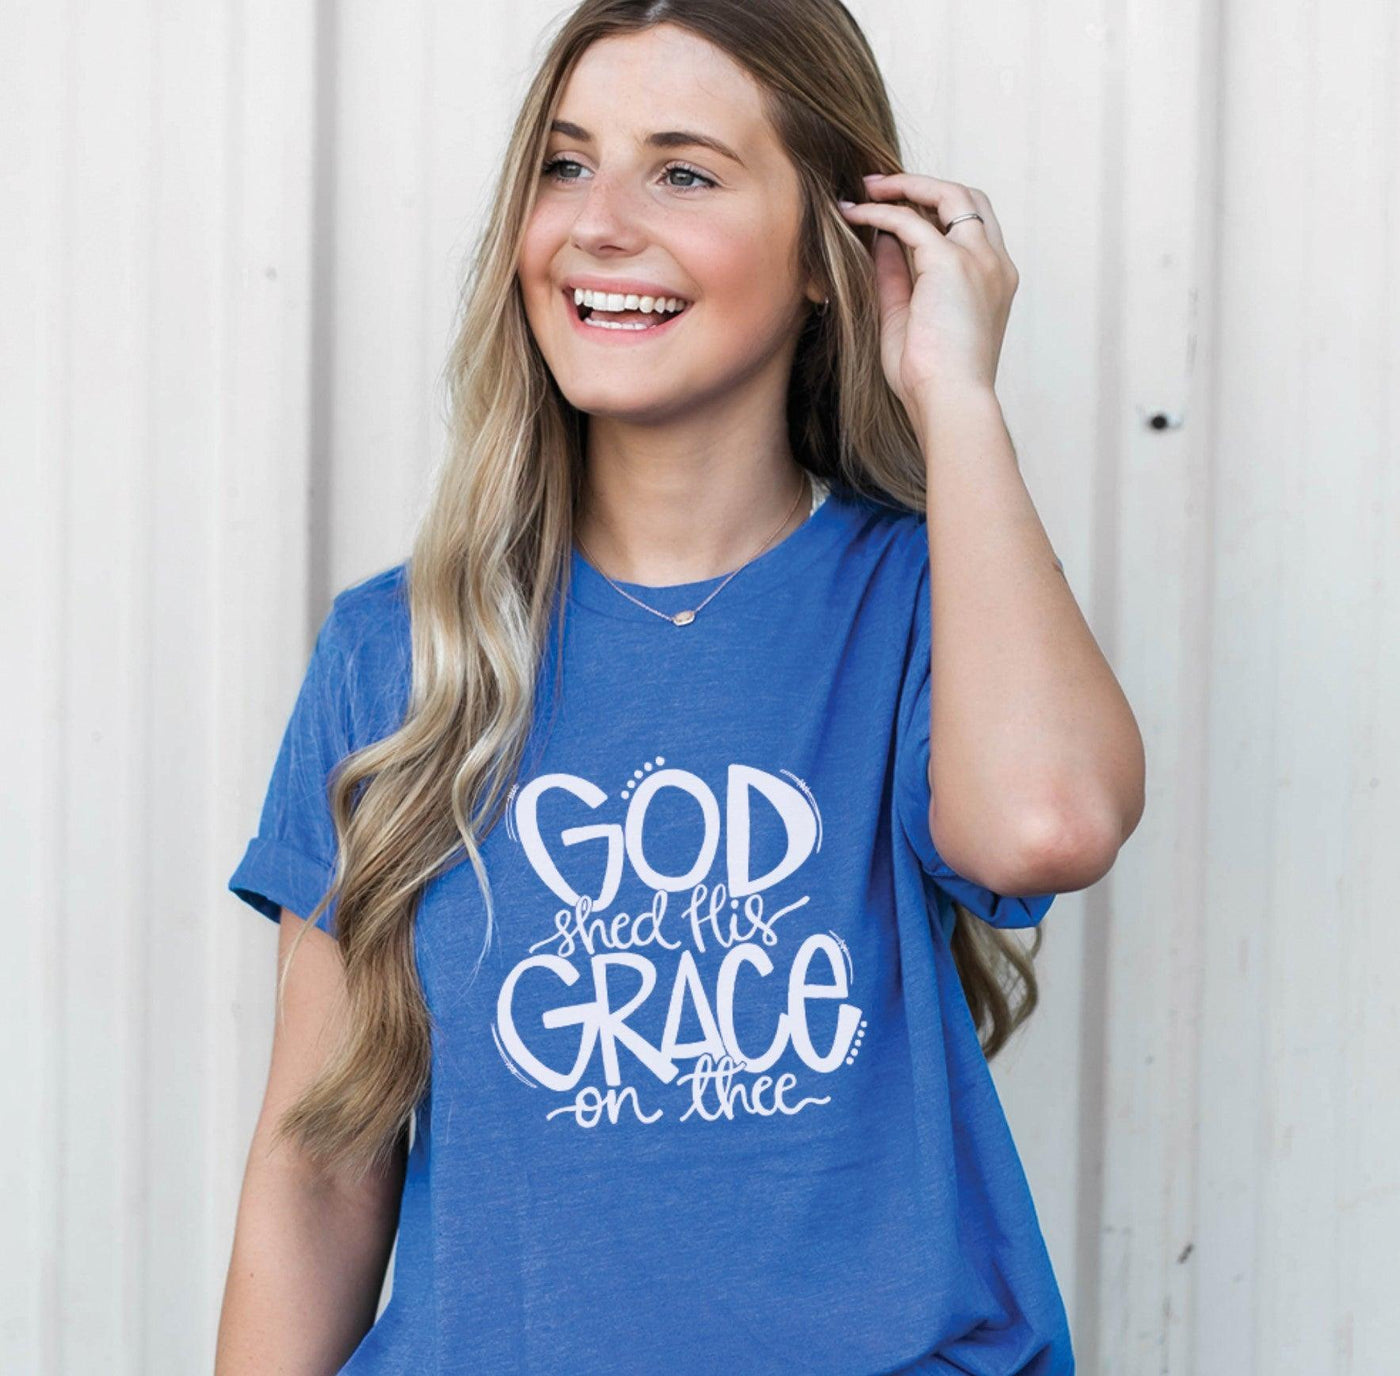 God shed his grace on thee - Grace & Co. Designs 